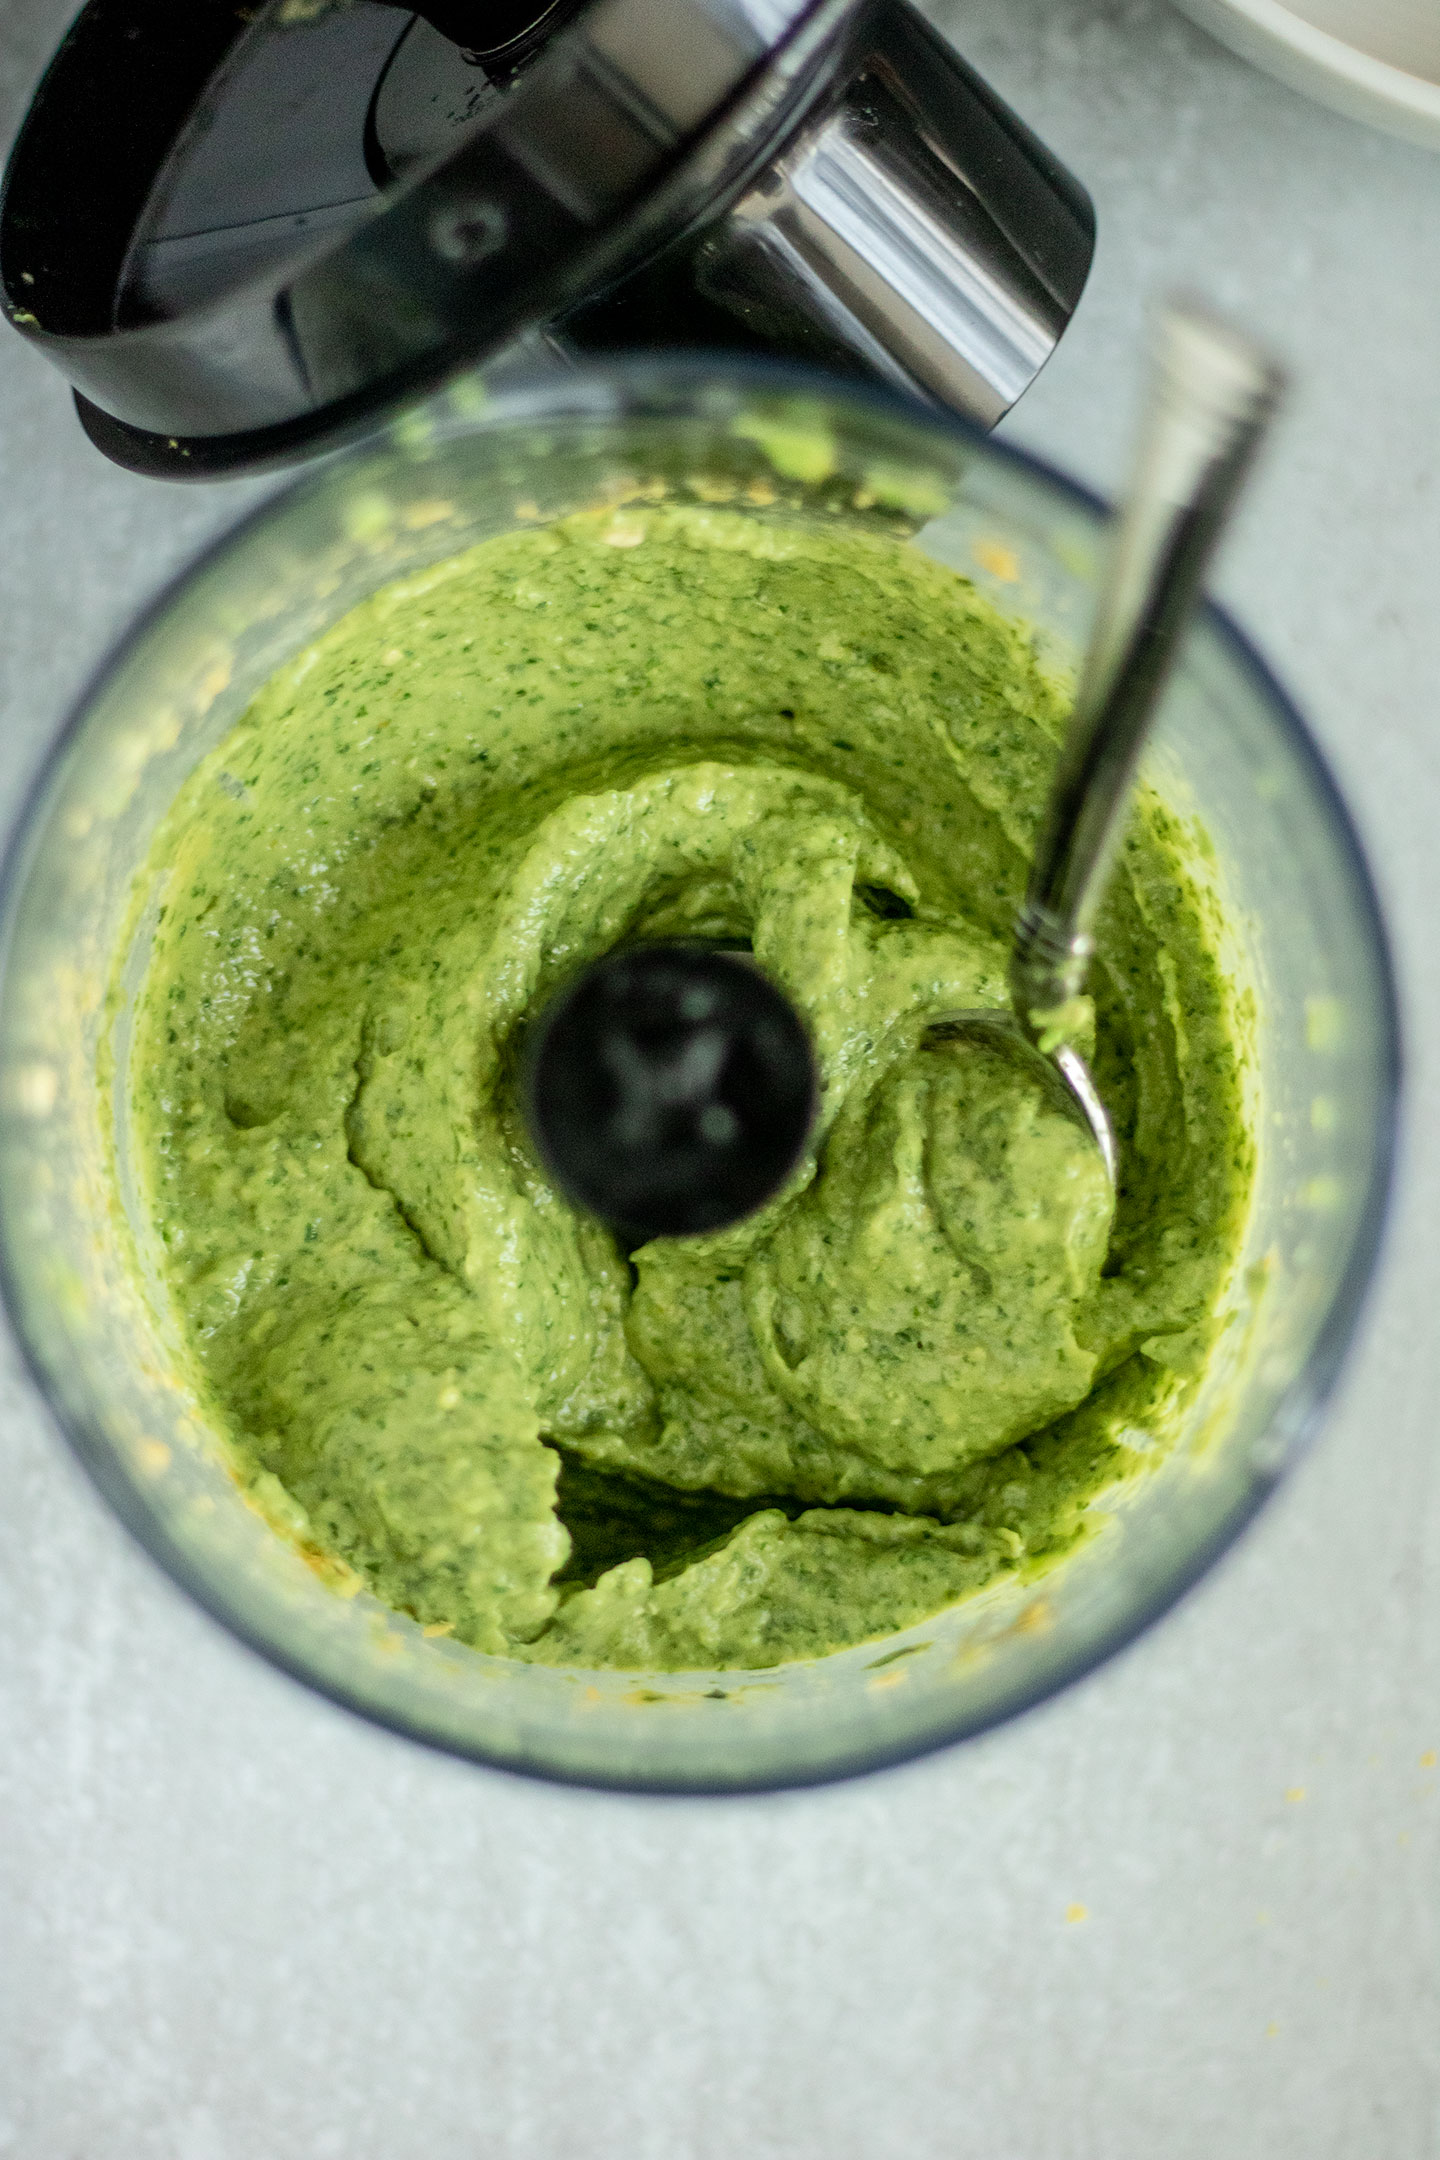 All the dressing ingredients blended together until creamy and beautifully green.